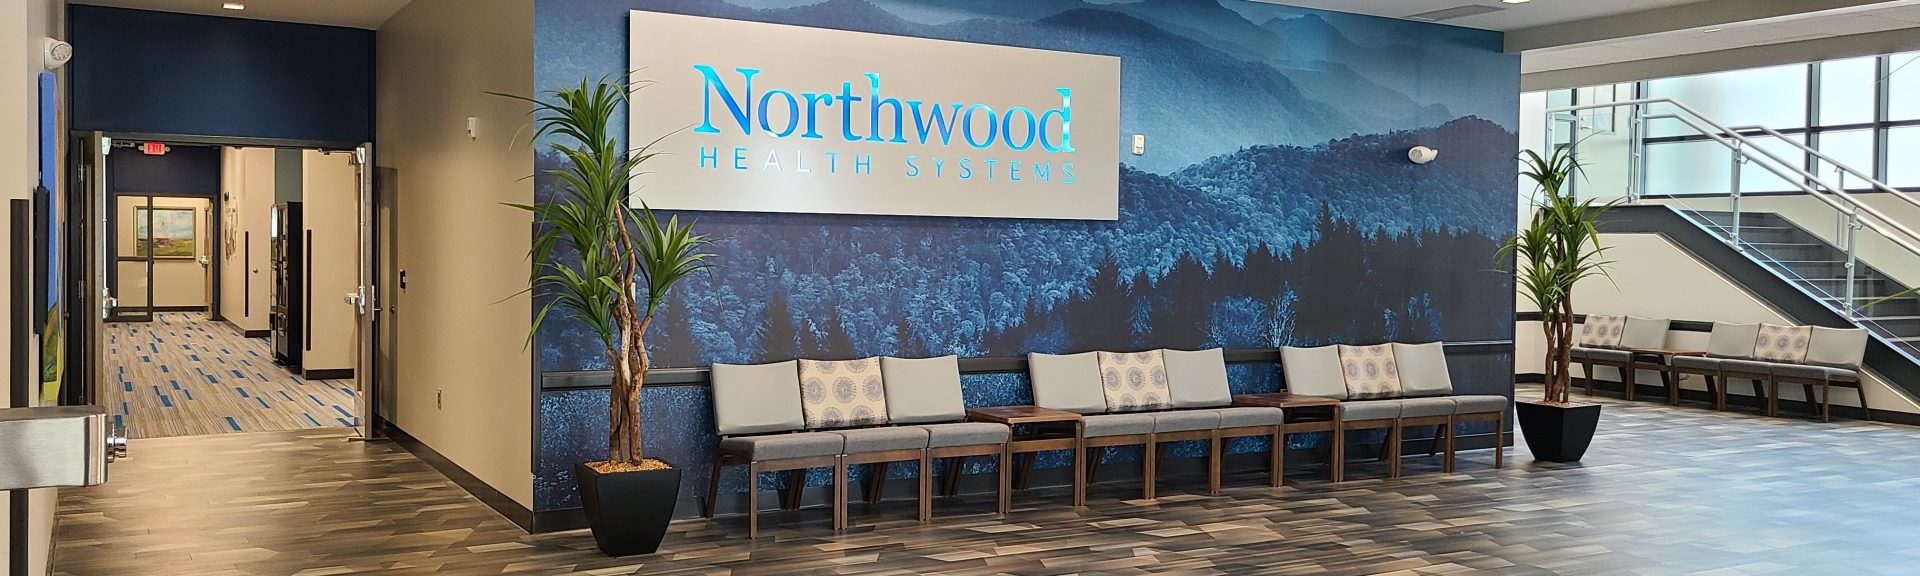 Northwood Health Systems - Outpatient